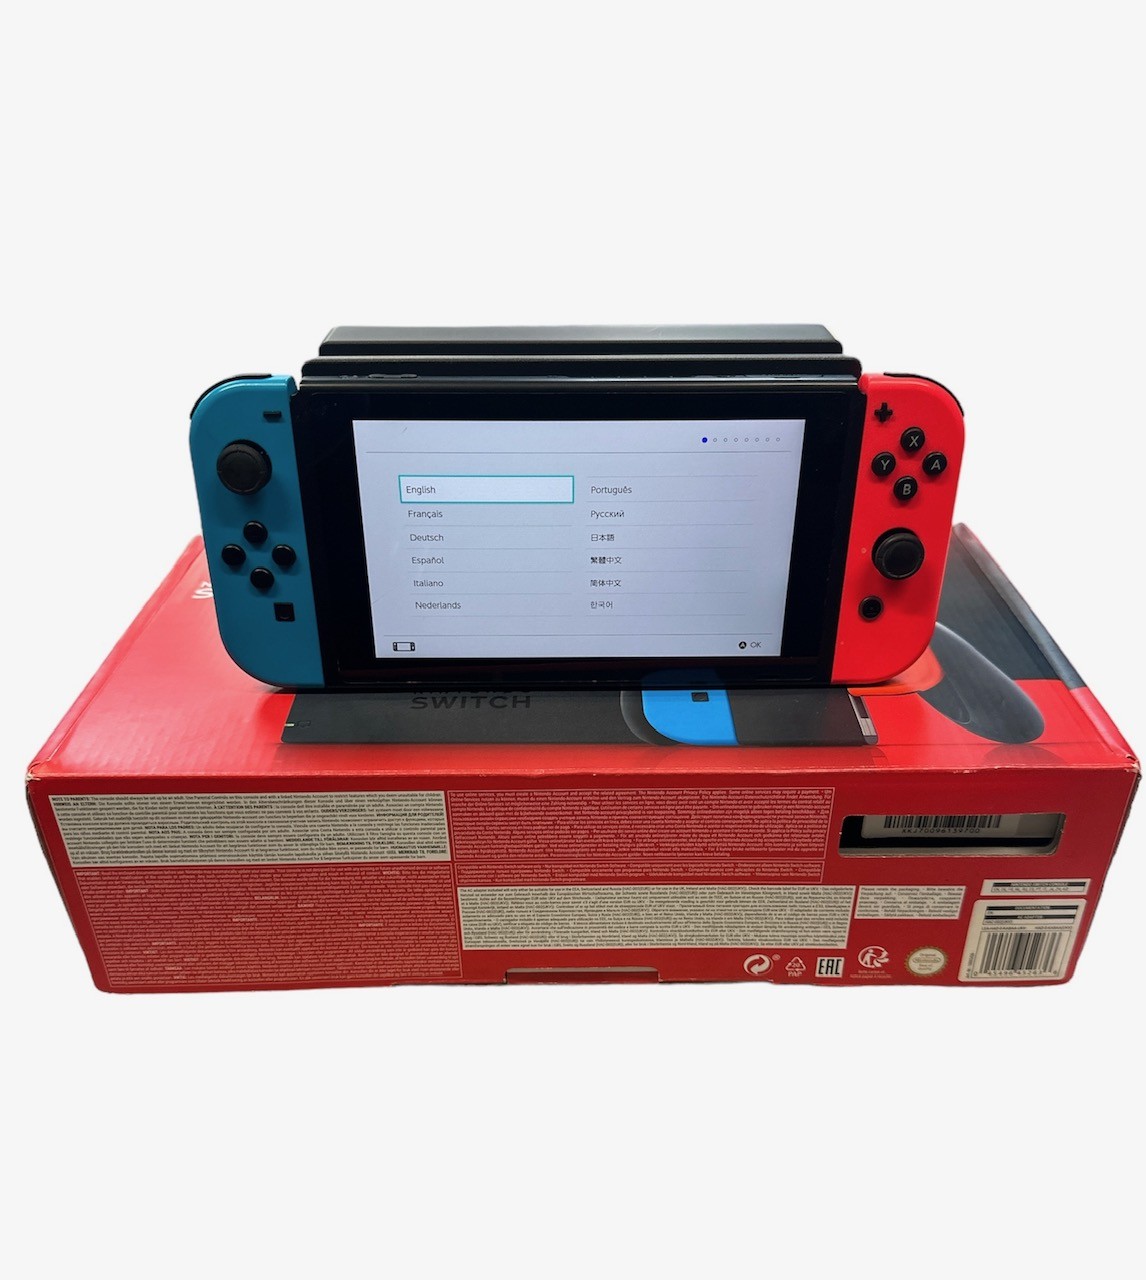 Nintendo Switch Boxed Console Neon Red Blue - No Kickstand